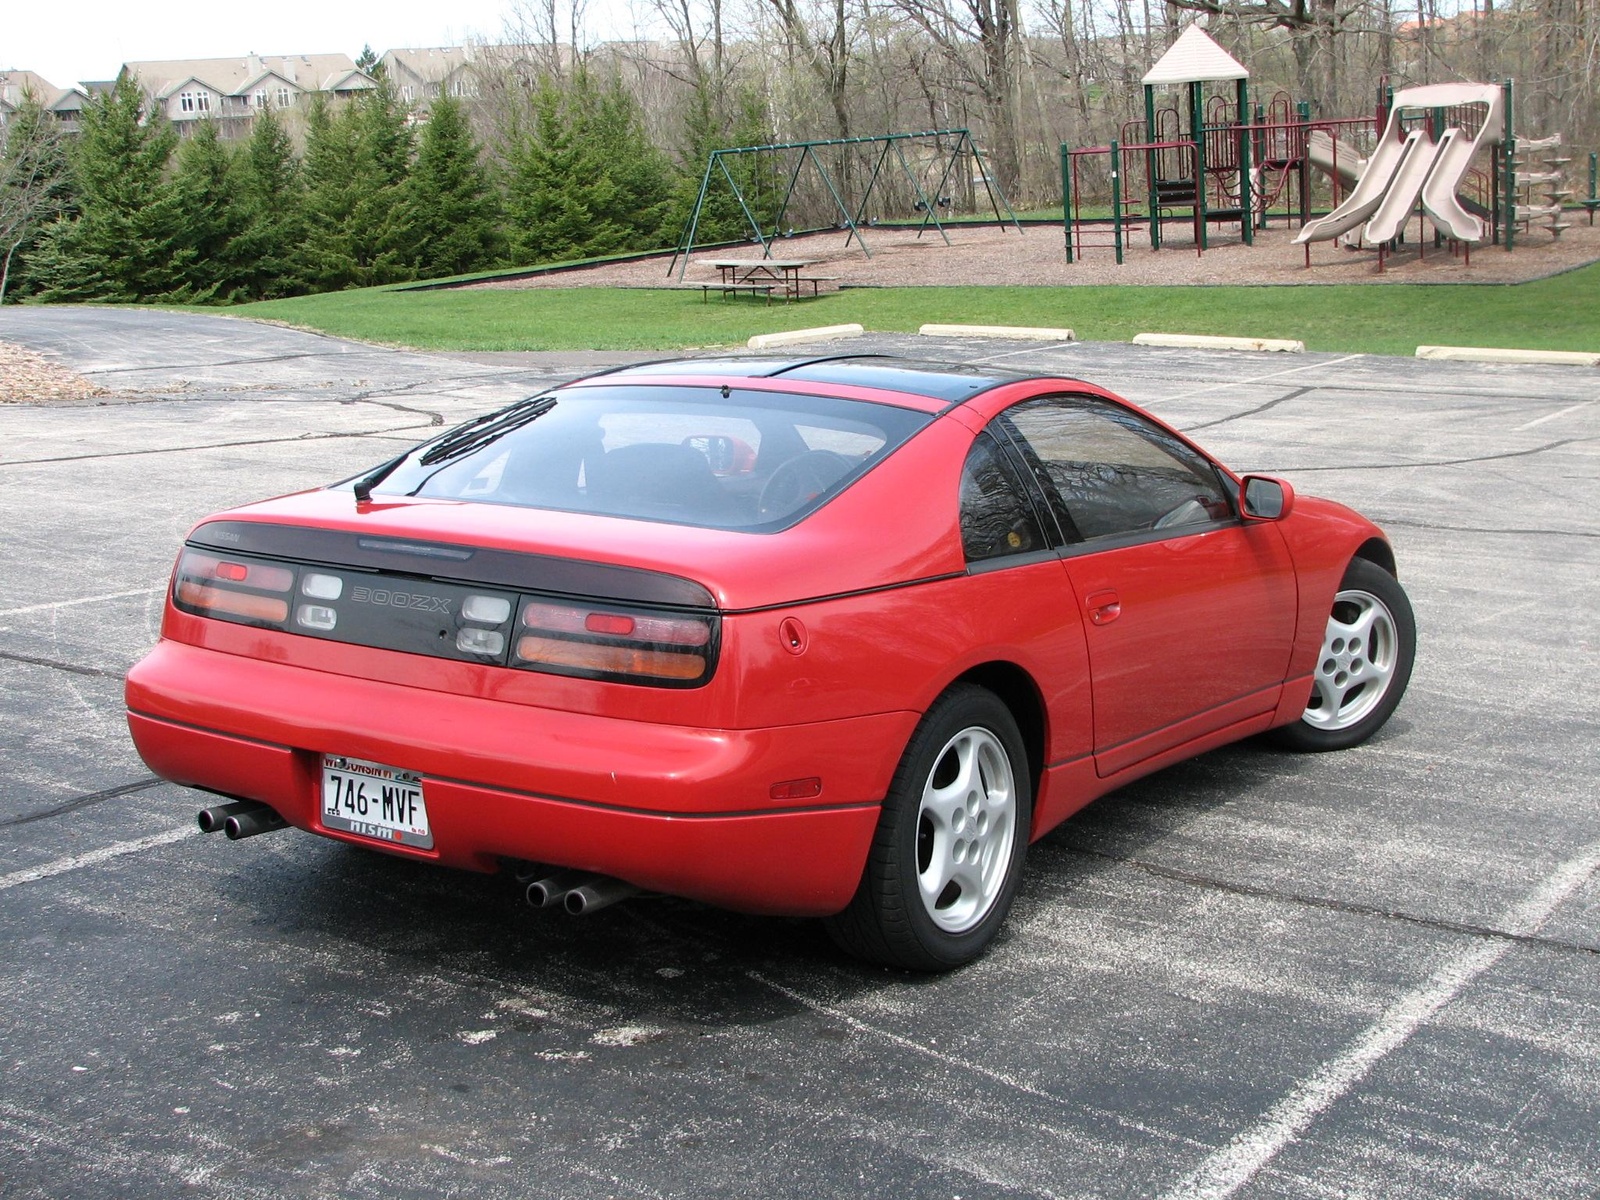 Picture of a 1990 nissan 300zx #1